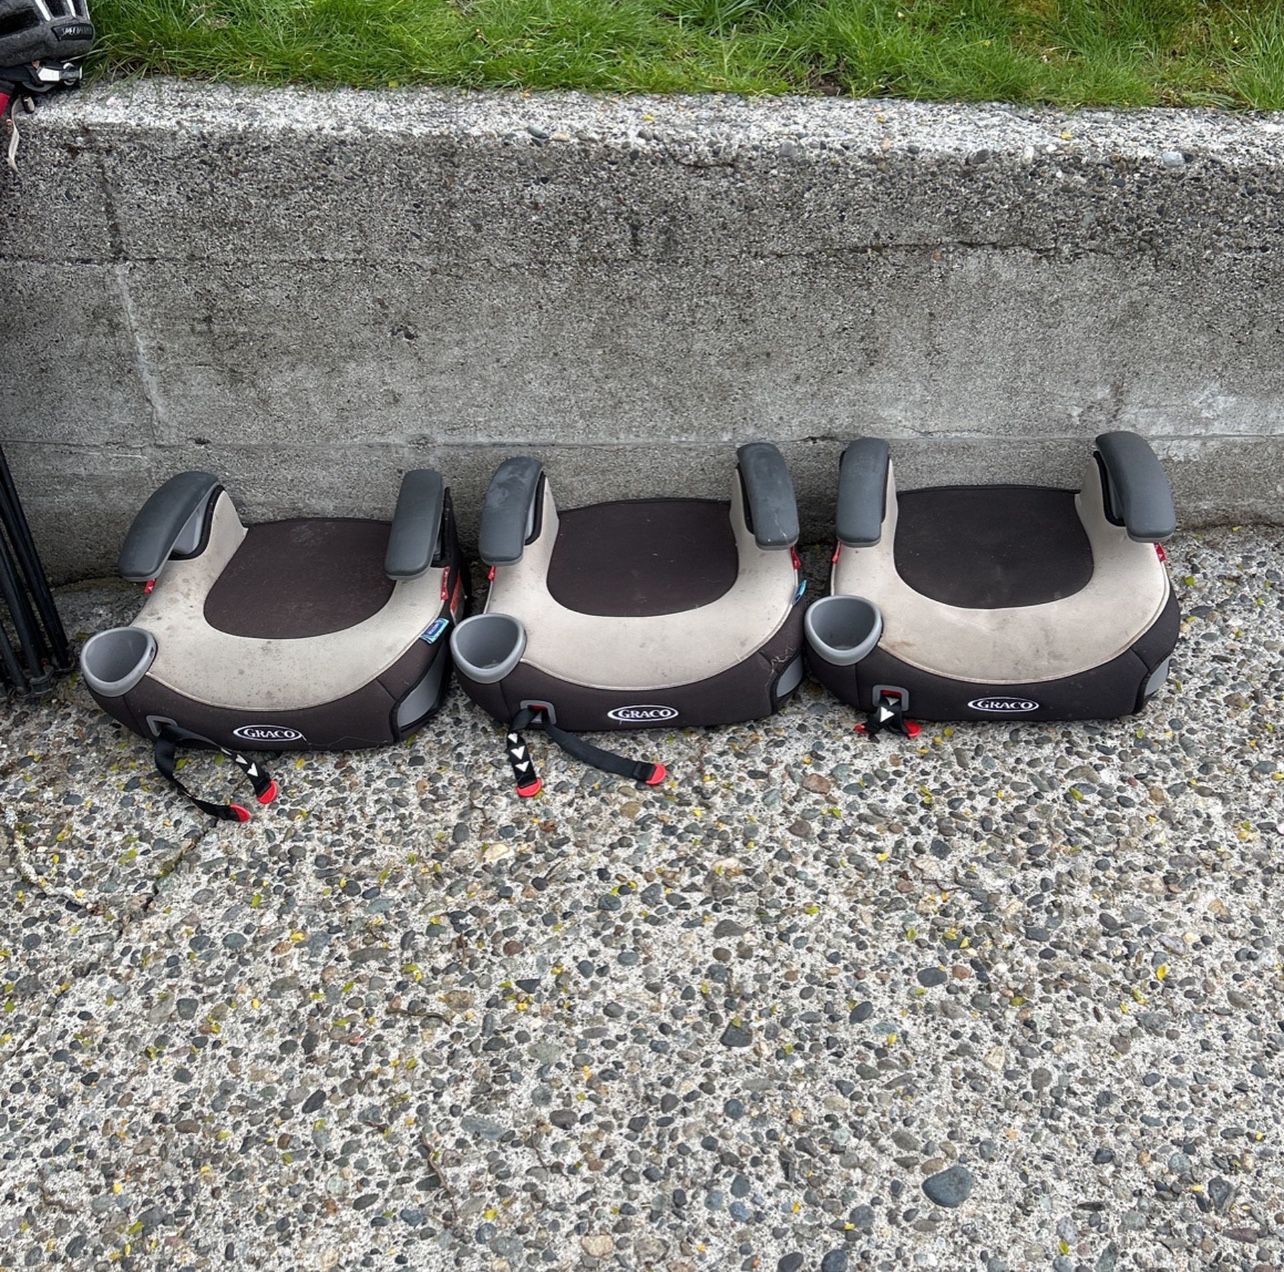 Graco Booster Seat (3) - FREE